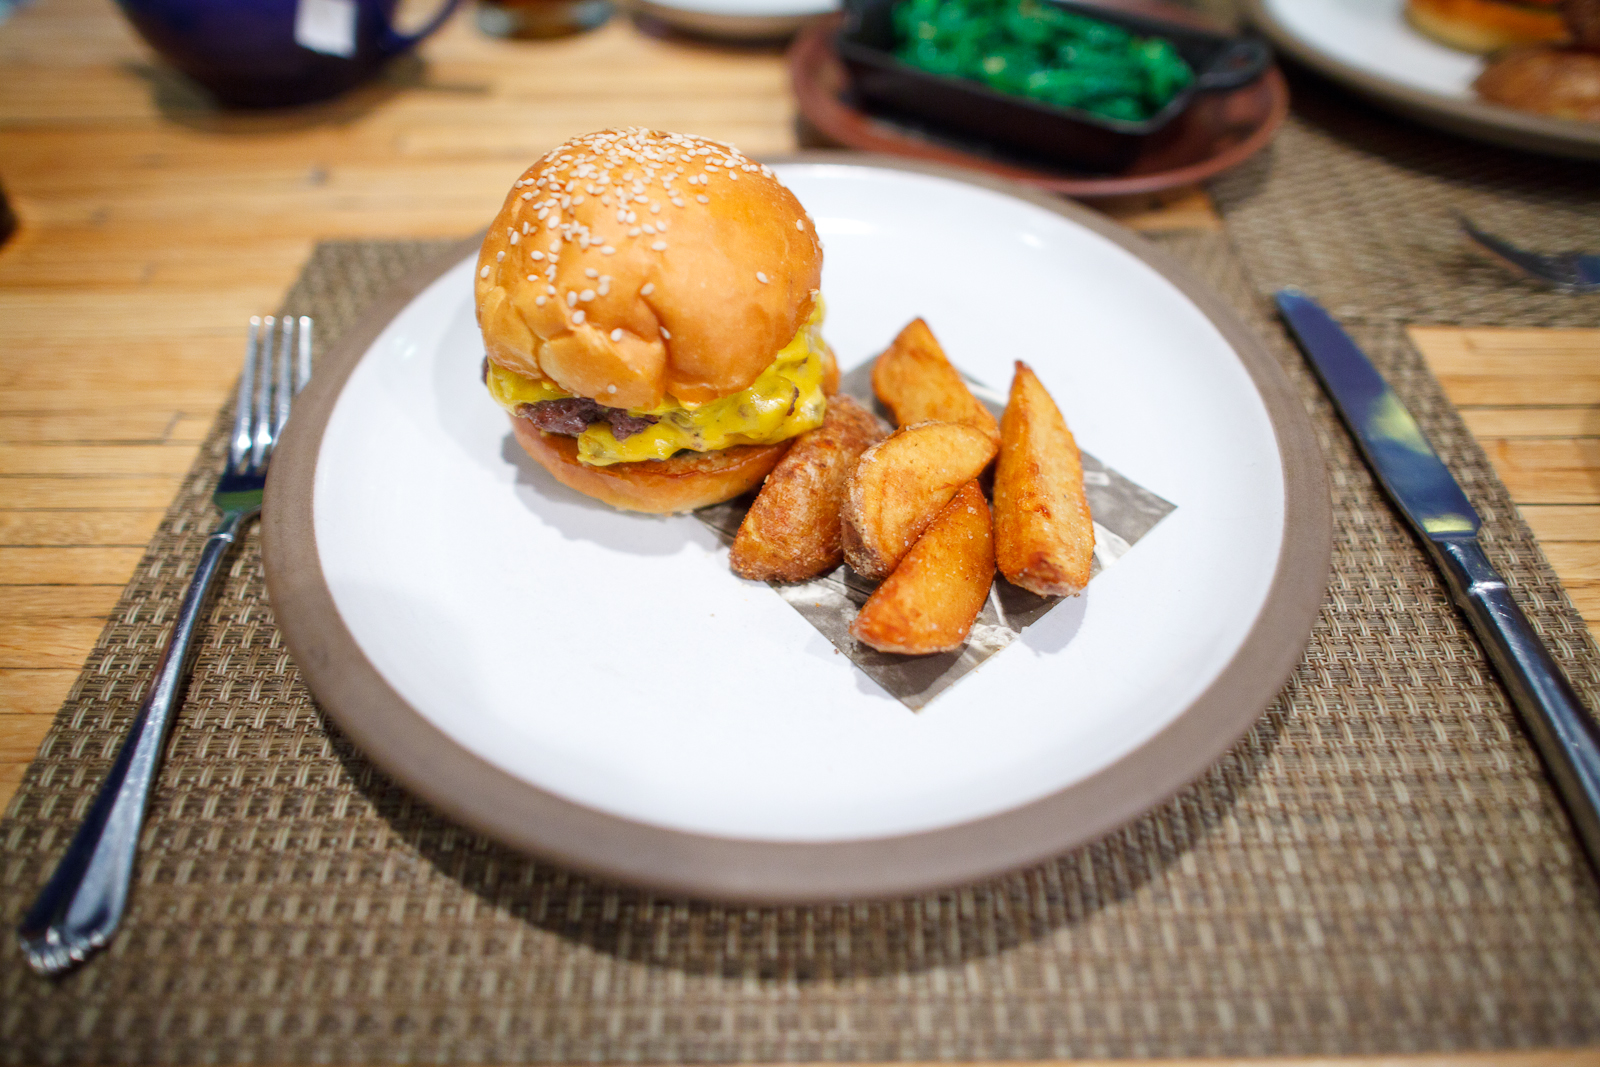 5th Course: HUSK Cheeseburger with Fried Potato Wedges